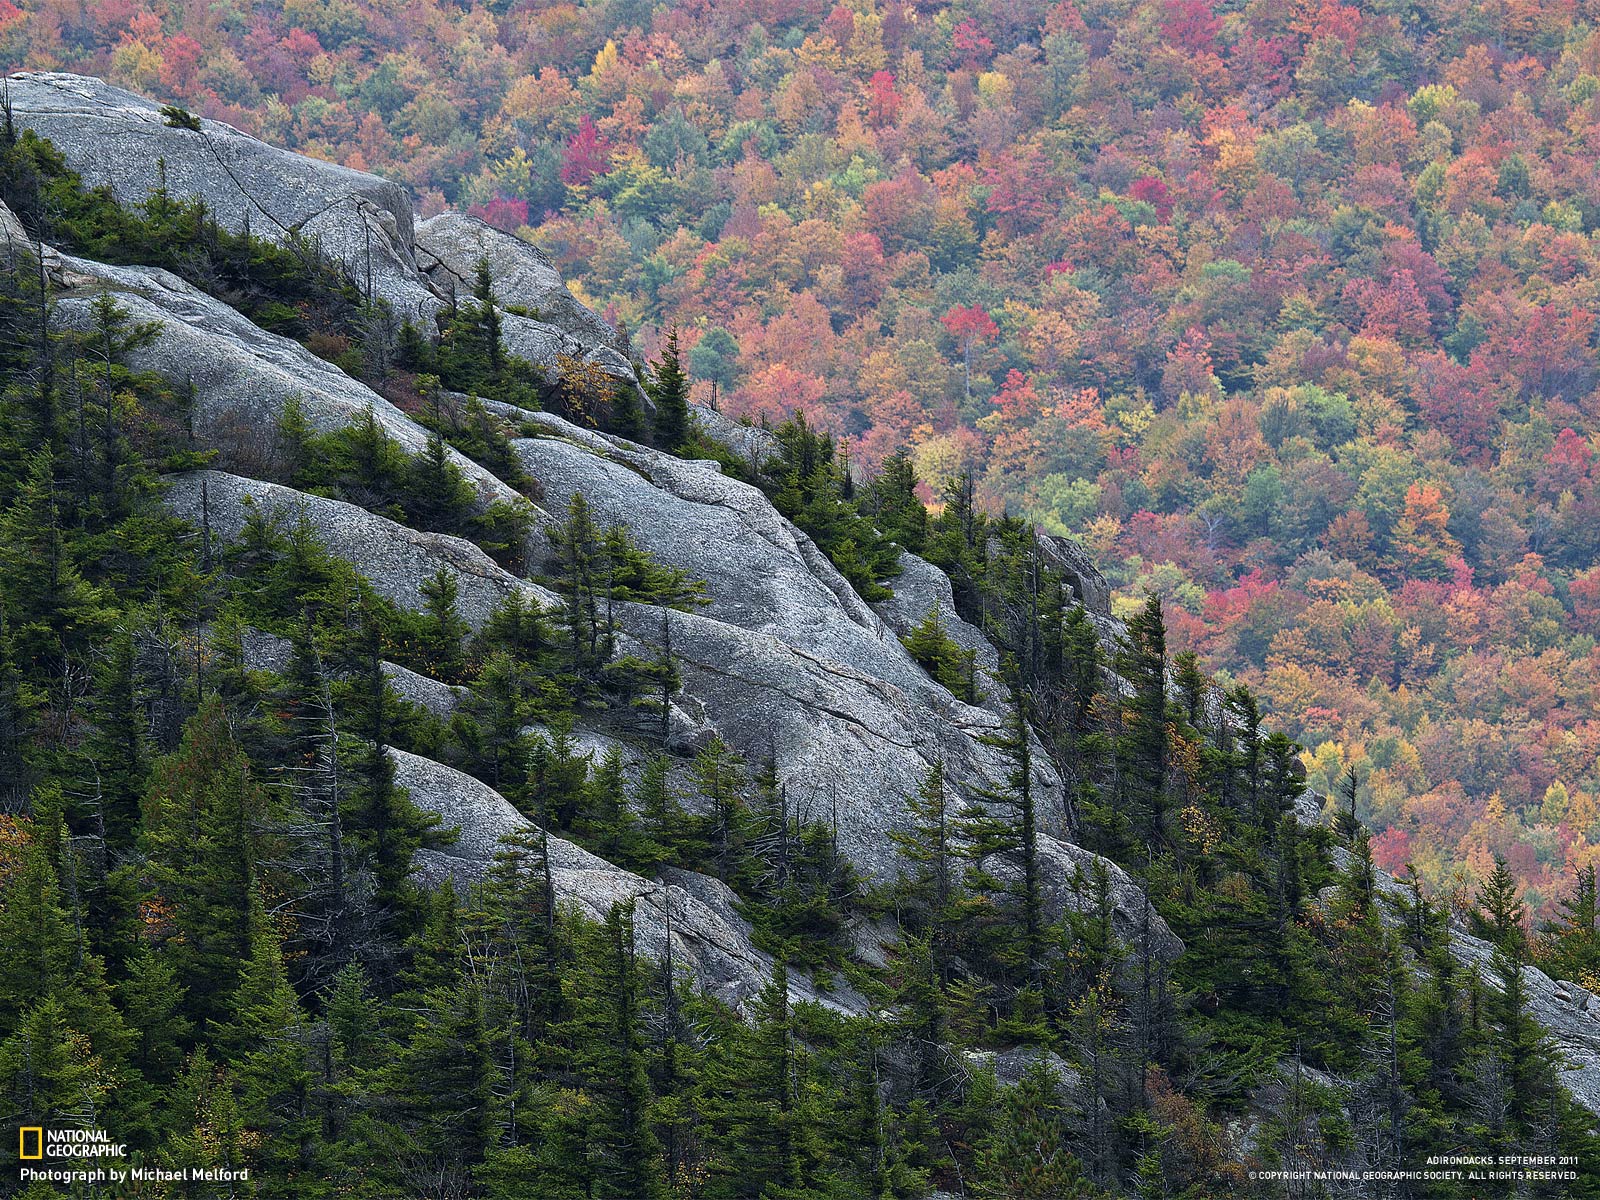 Adirondack Park   Photo Gallery   Pictures More From National